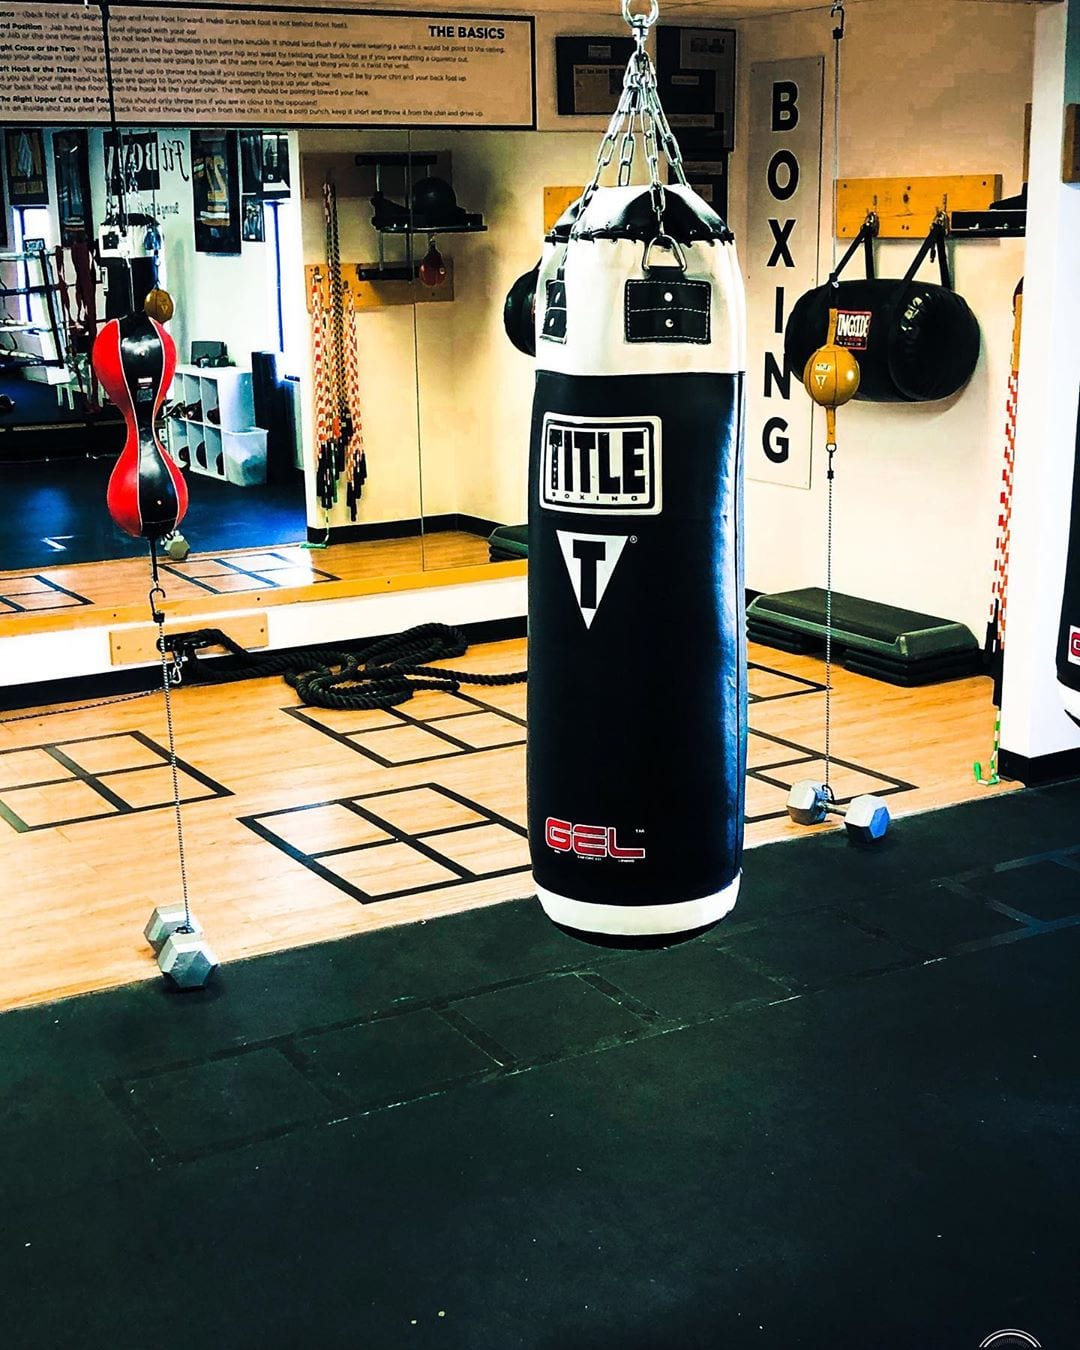 Boxing Studio in Dedham,Ma . If you were always wanting to try a boxing workout and it’s your first time !! Contact us Today and we can schedule you in to come in for Free boxing workout. Call/text (781)727-9503. . #boxing #boxingtrainer #boxingstudio #fitness #exercise #beginners #firsttime #cardio #conditioning #fightfit #selfdefense #men #women #workout @instagram #followers #Dedham #Boston @tommymcinerney